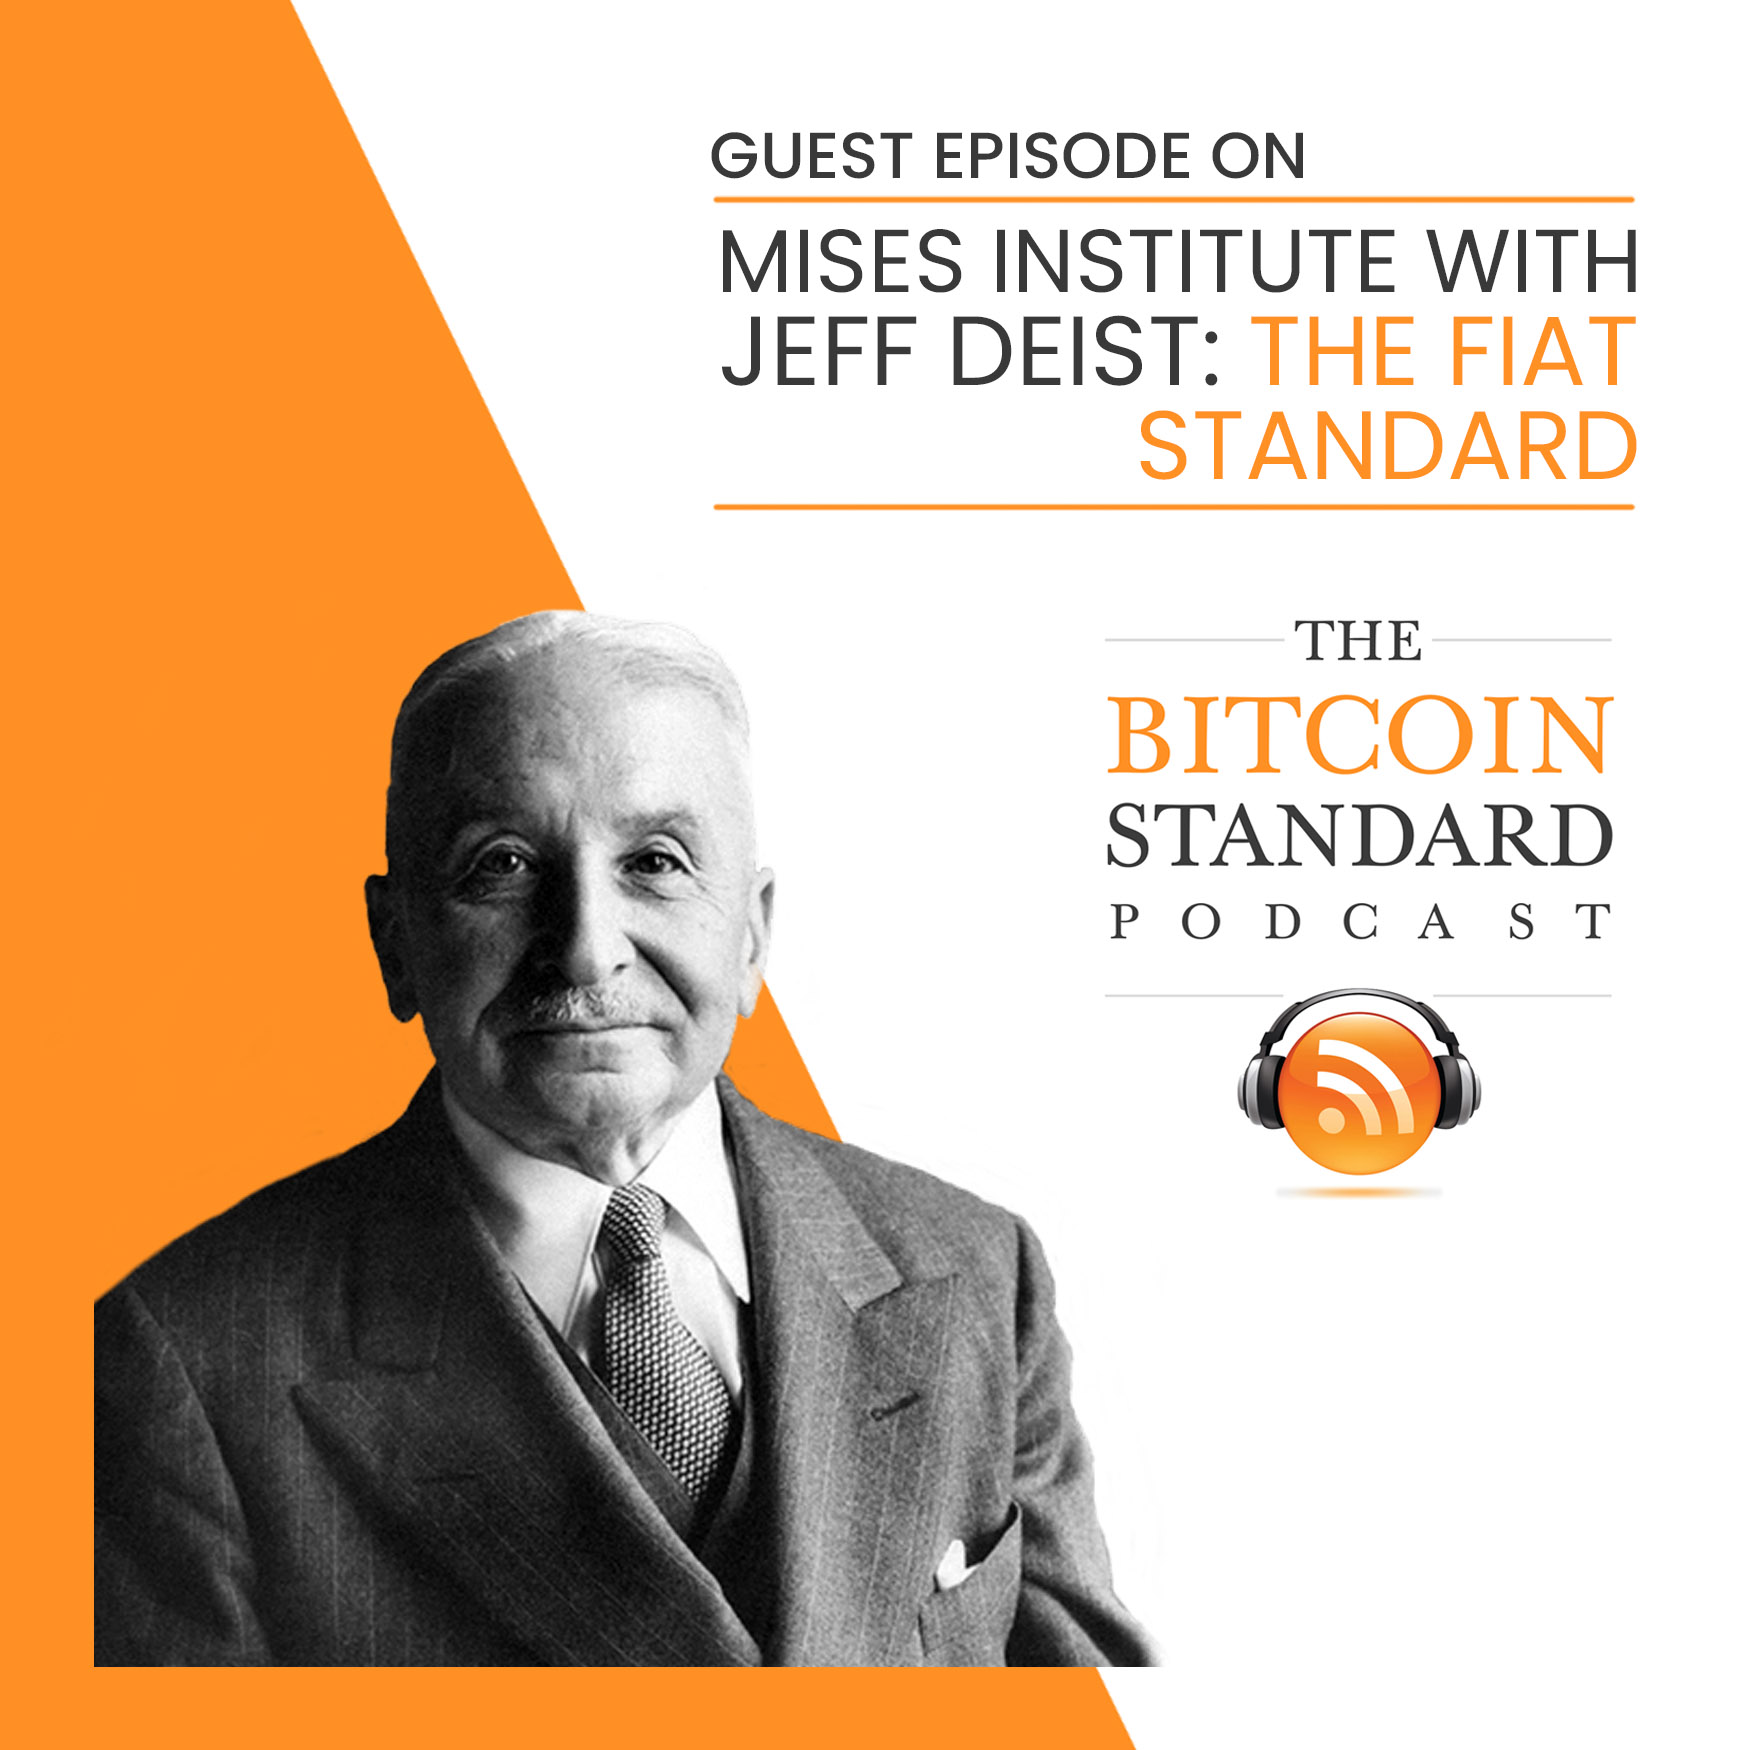 Guest Episode: Mises Institute with Jeff Deist: The Fiat Standard